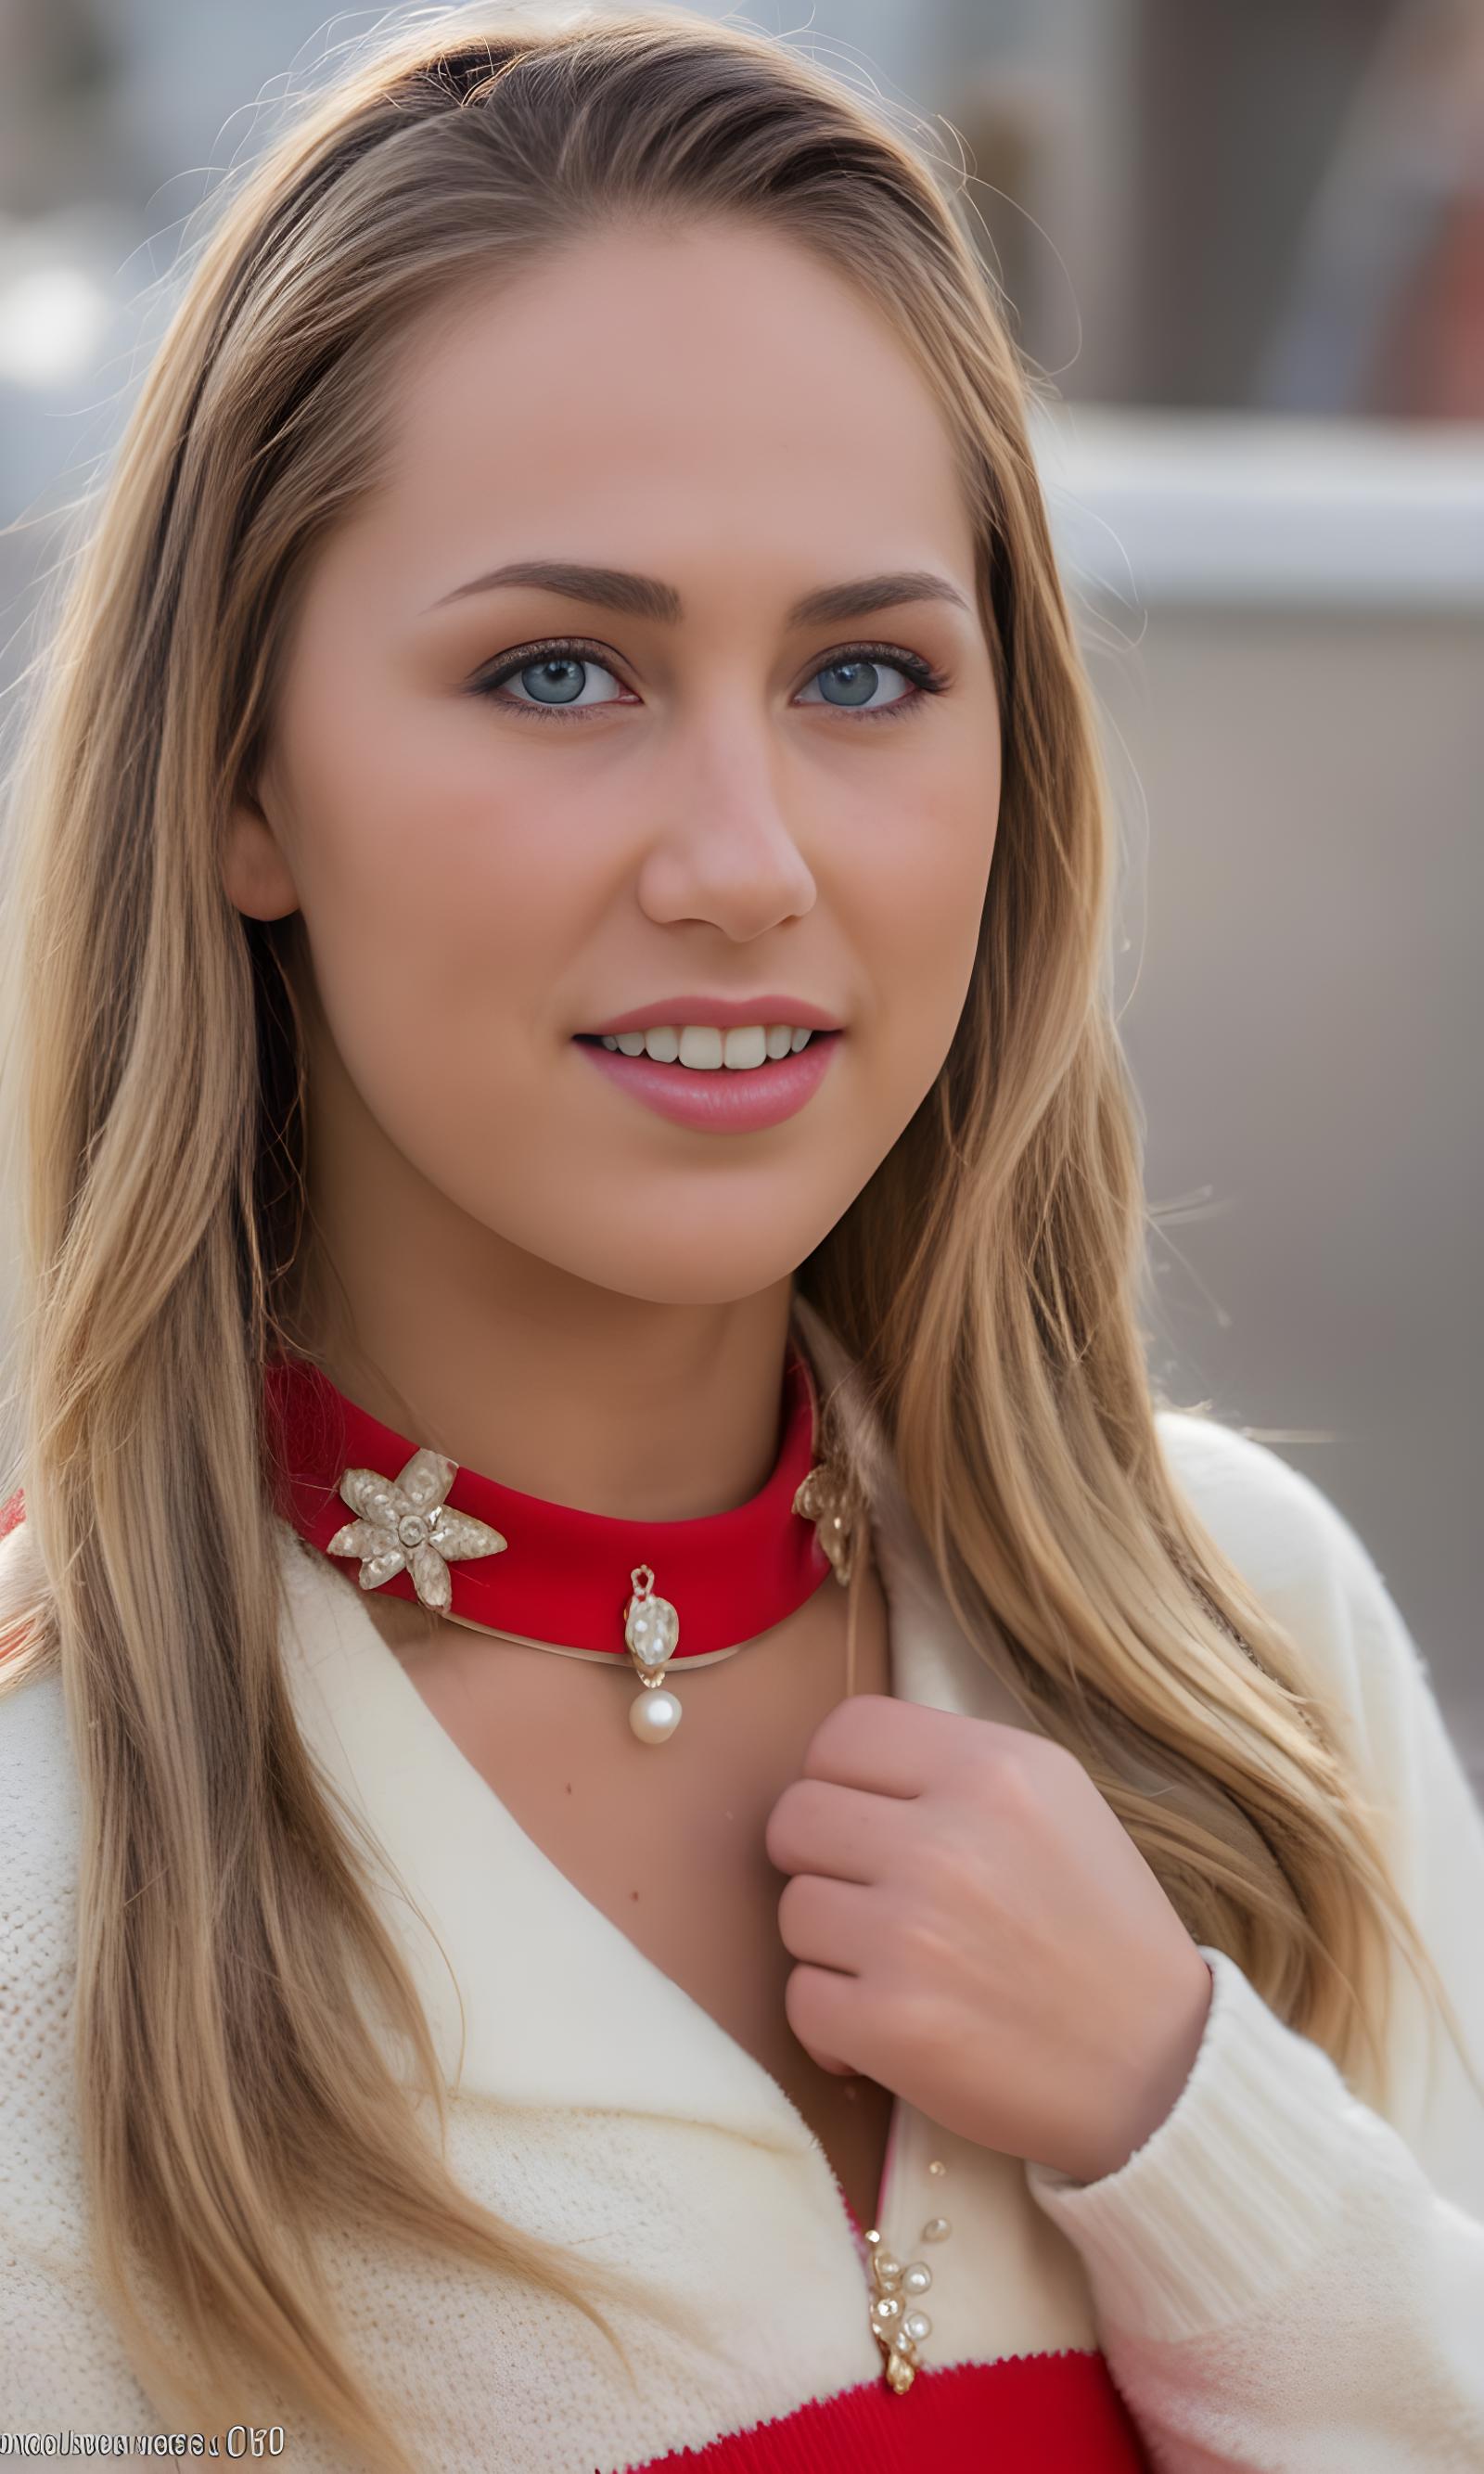 Carter Cruise (Adult Film Star) image by benzonah273